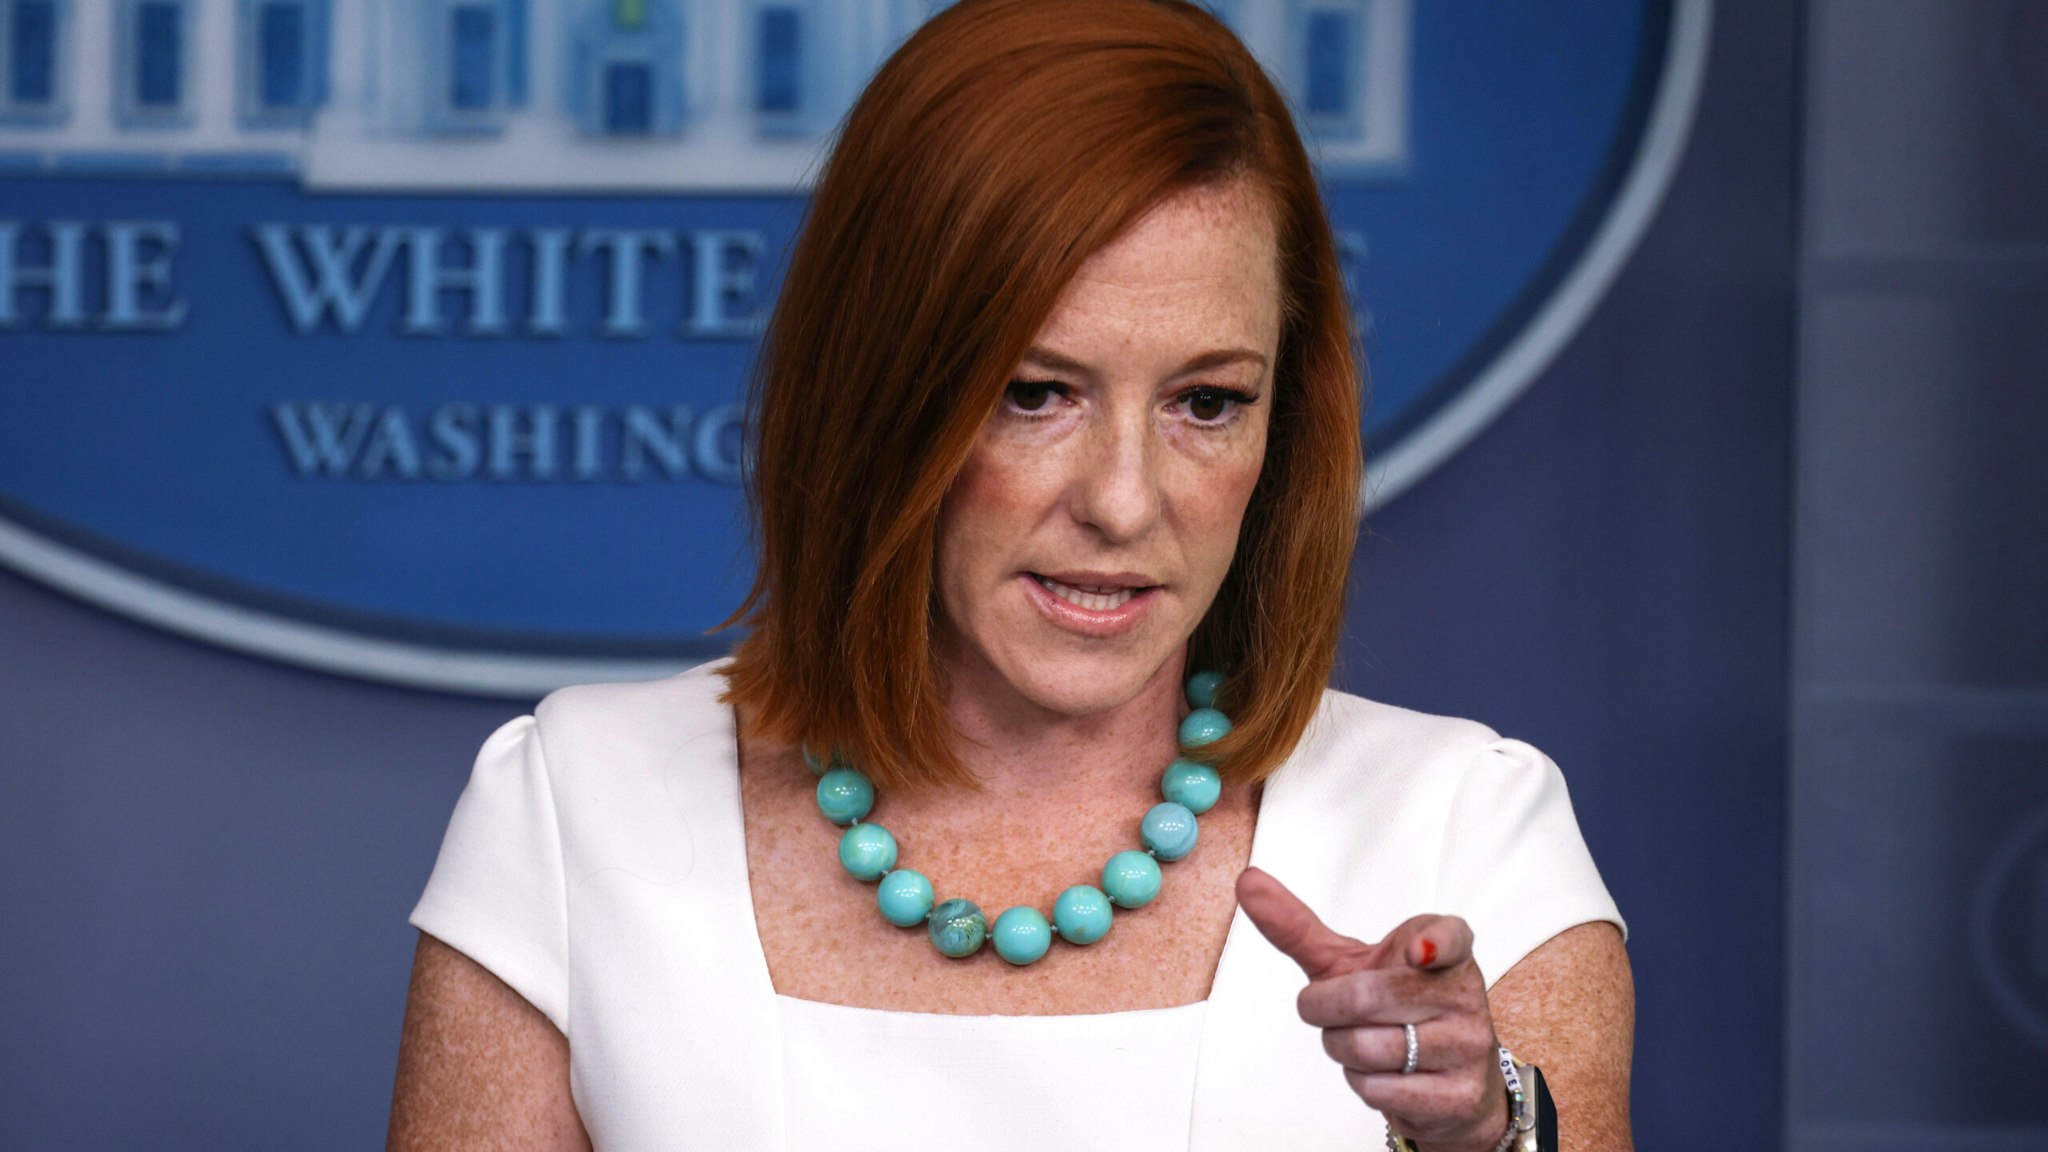 WASHINGTON, DC - JULY 26: White House Press Secretary Jen Psaki gestures as she speaks at a daily press briefing in the James Brady Press Briefing Room of the White House on July 26, 2021 in Washington, DC. Psaki reiterated the administrations confidence in the Center for Disease Control (CDC) on advising next steps that should be taken as Coronavirus cases continue to rise in the United States.